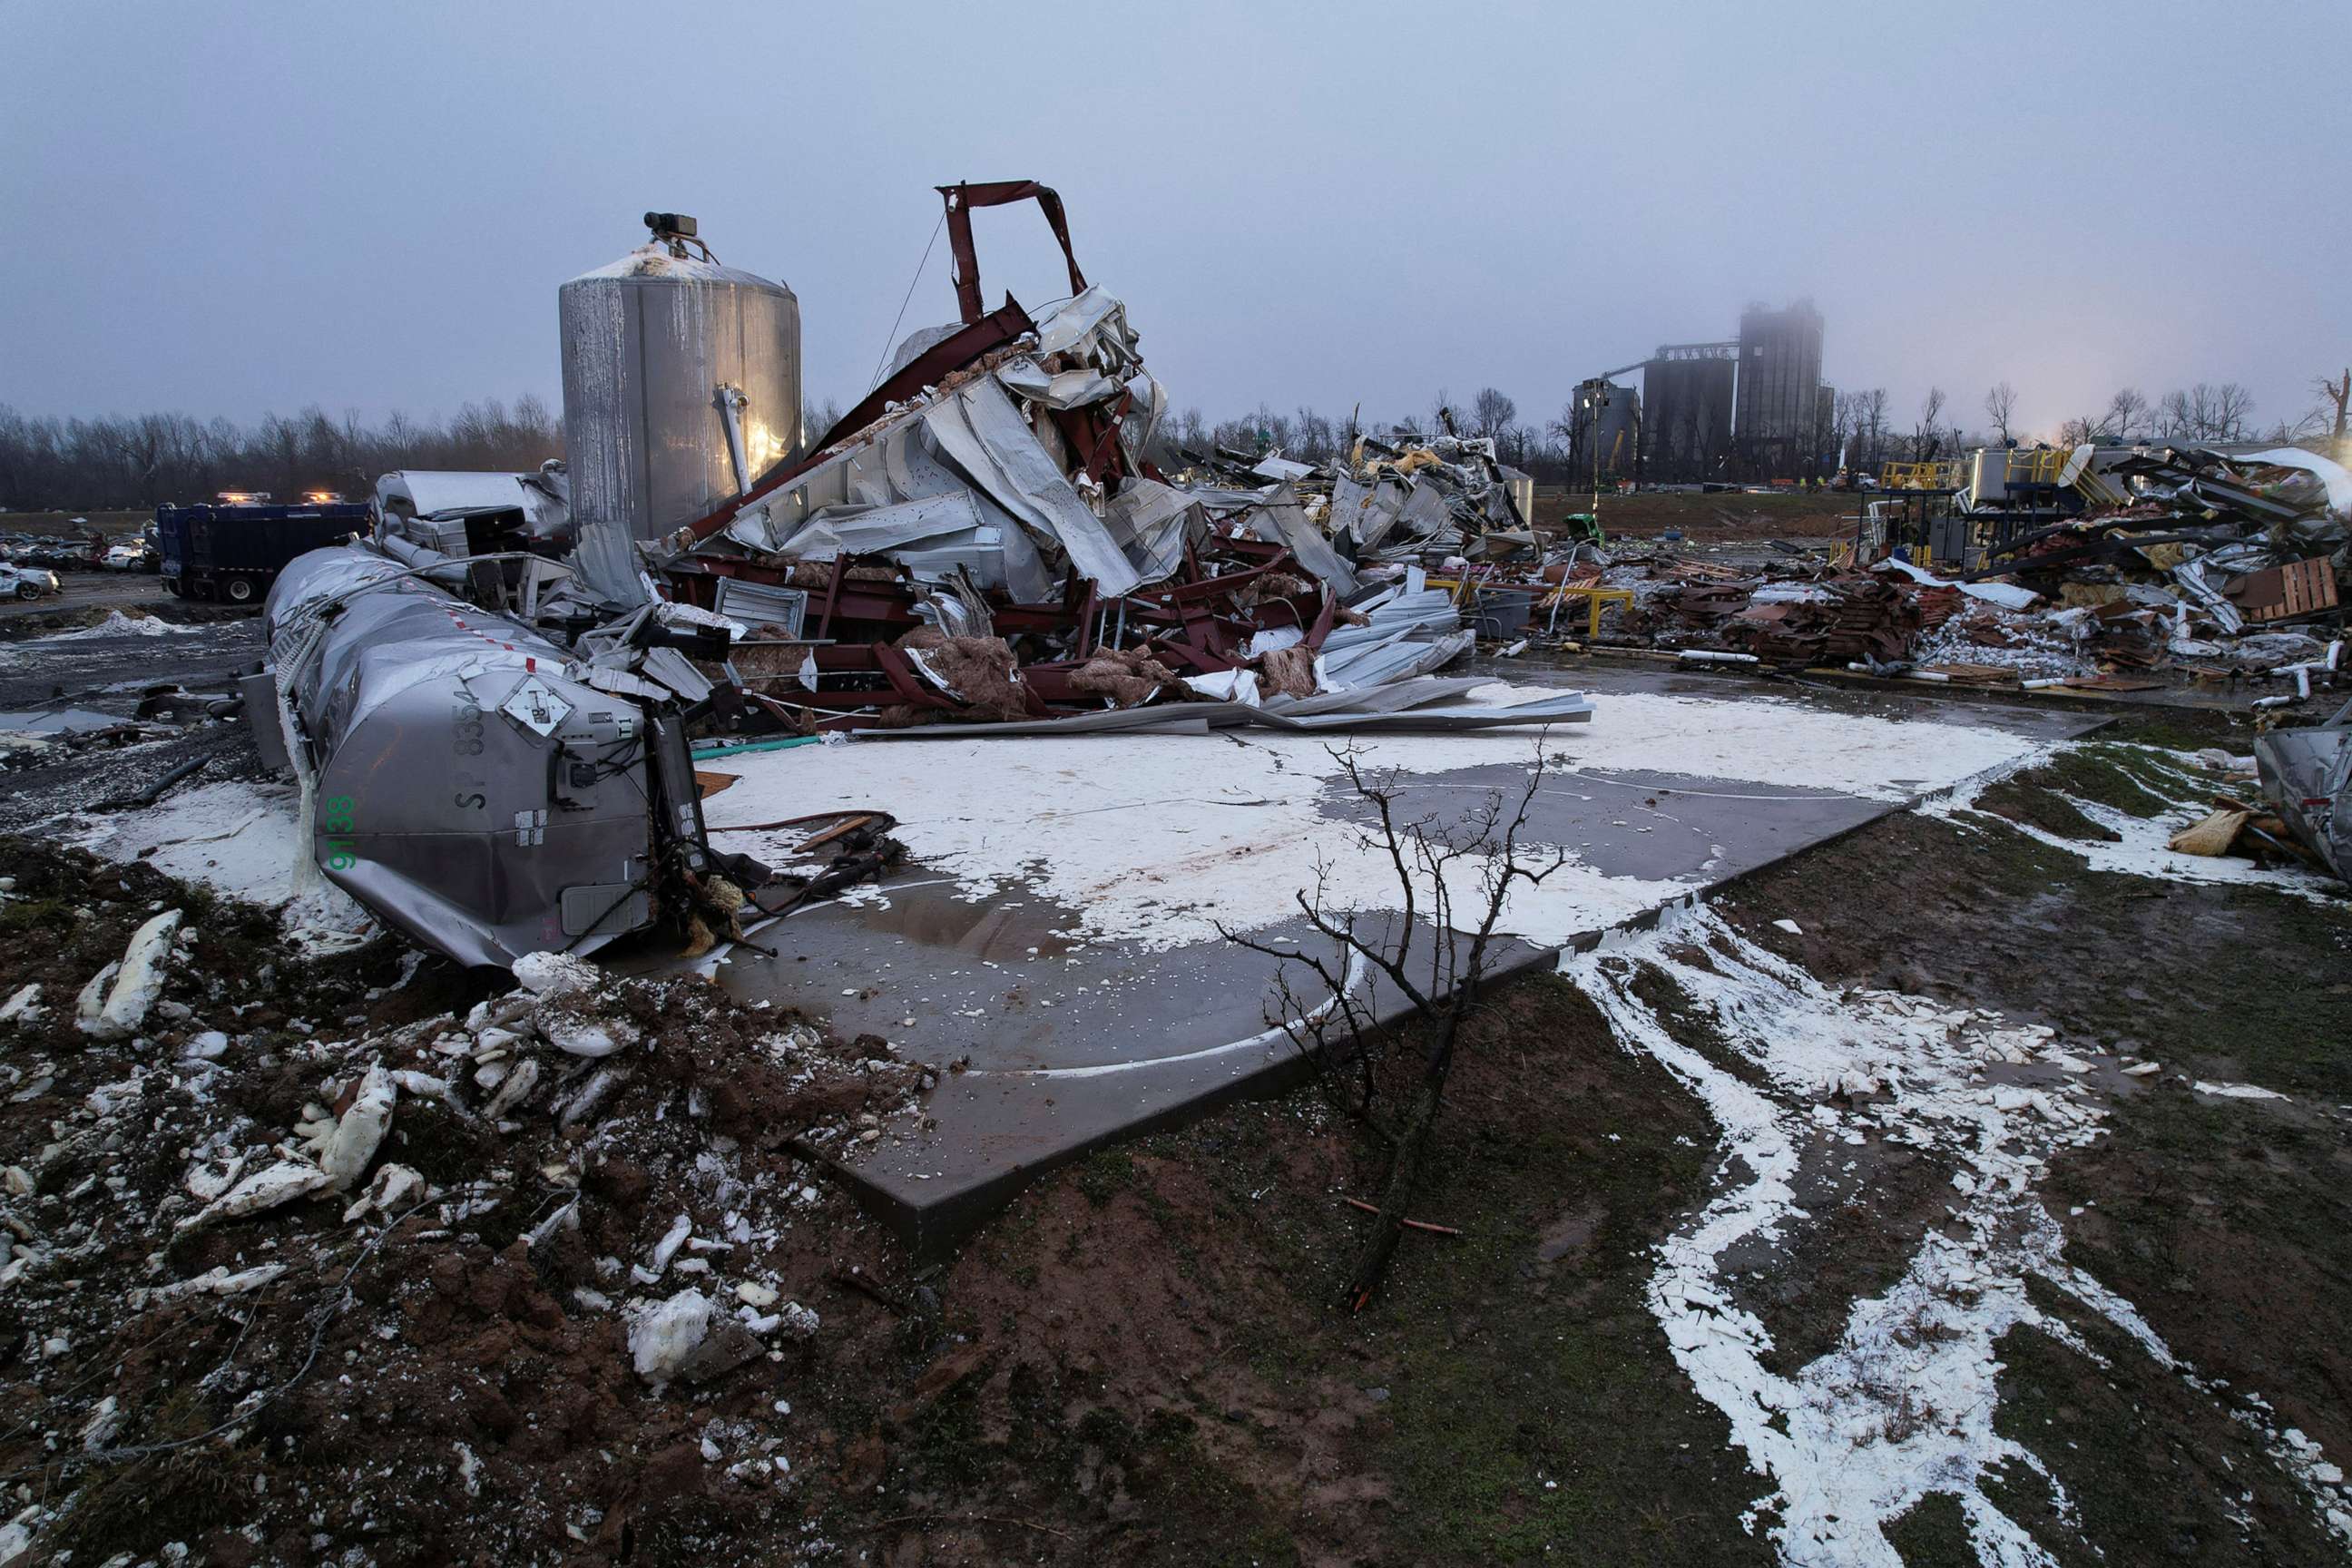 PHOTO: Dried wax is seen amongst the rubble of the Mayfield Consumer Products candle factory where eight people died after a devastating outbreak of tornadoes ripped through several U.S. states, in Mayfield, Ky., Dec. 17, 2021.